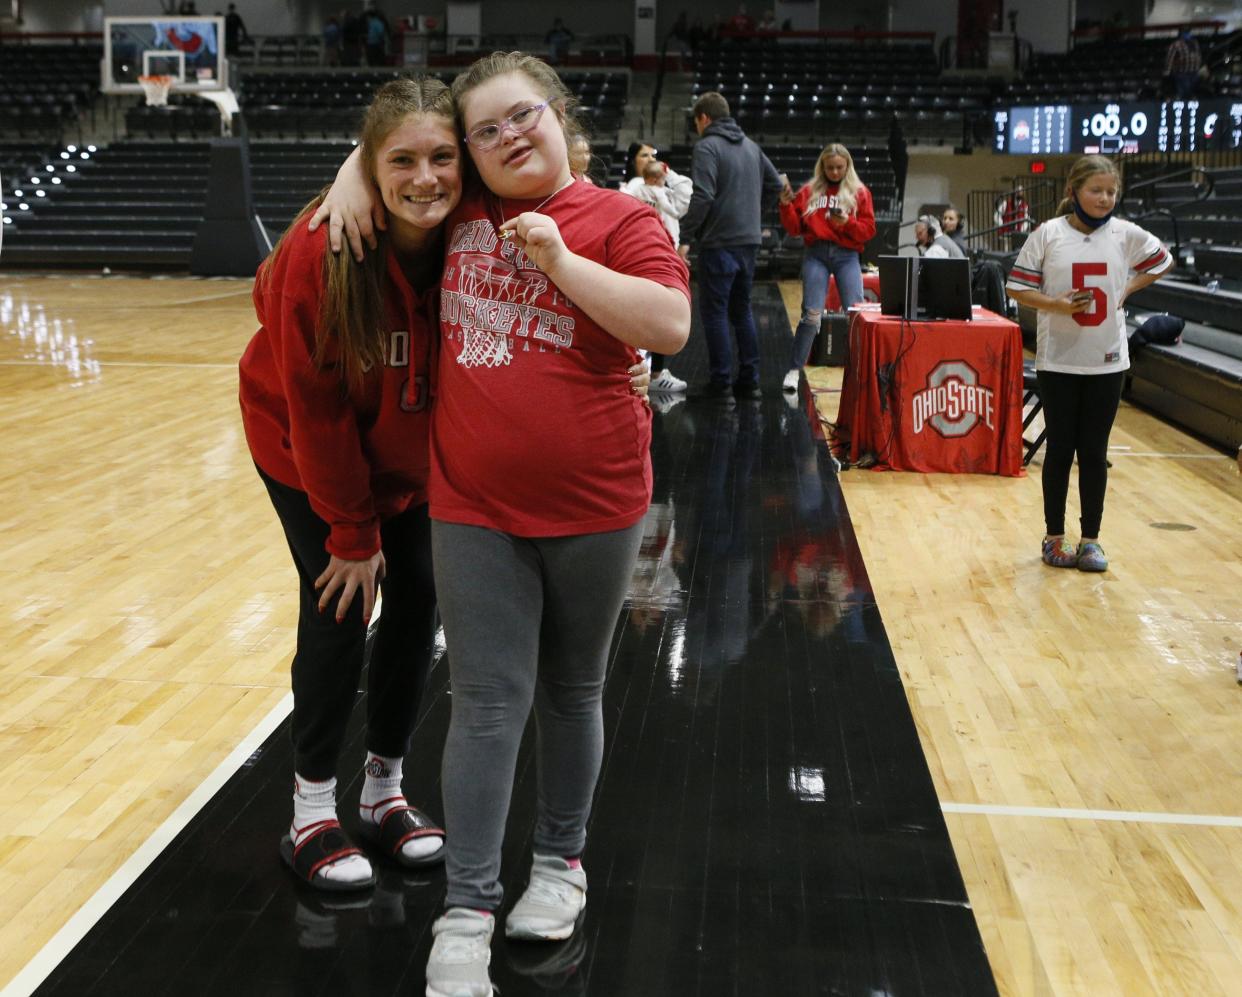 Emmy Sheldon hugs her sister Jacy Sheldon after a game in 2021.